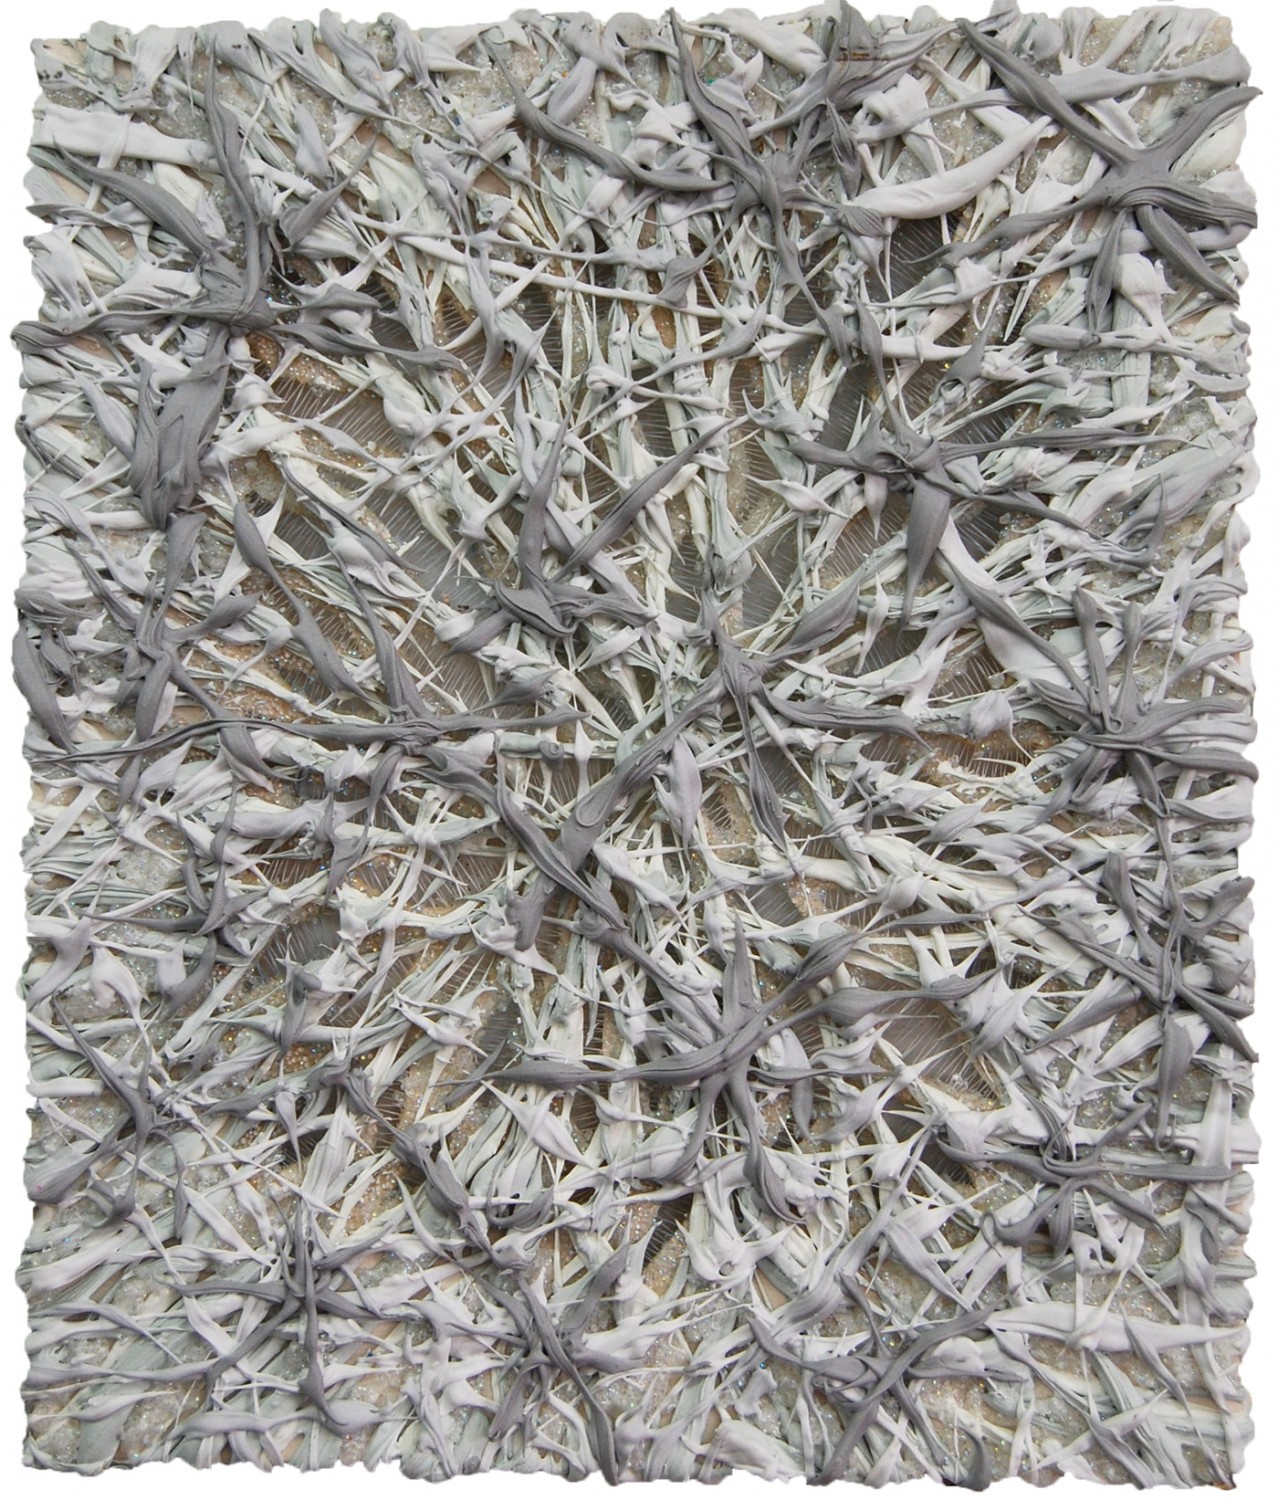 Gray Matter I, 2010, Ultralight, glass beads, pigment dispersions and thread on canvas